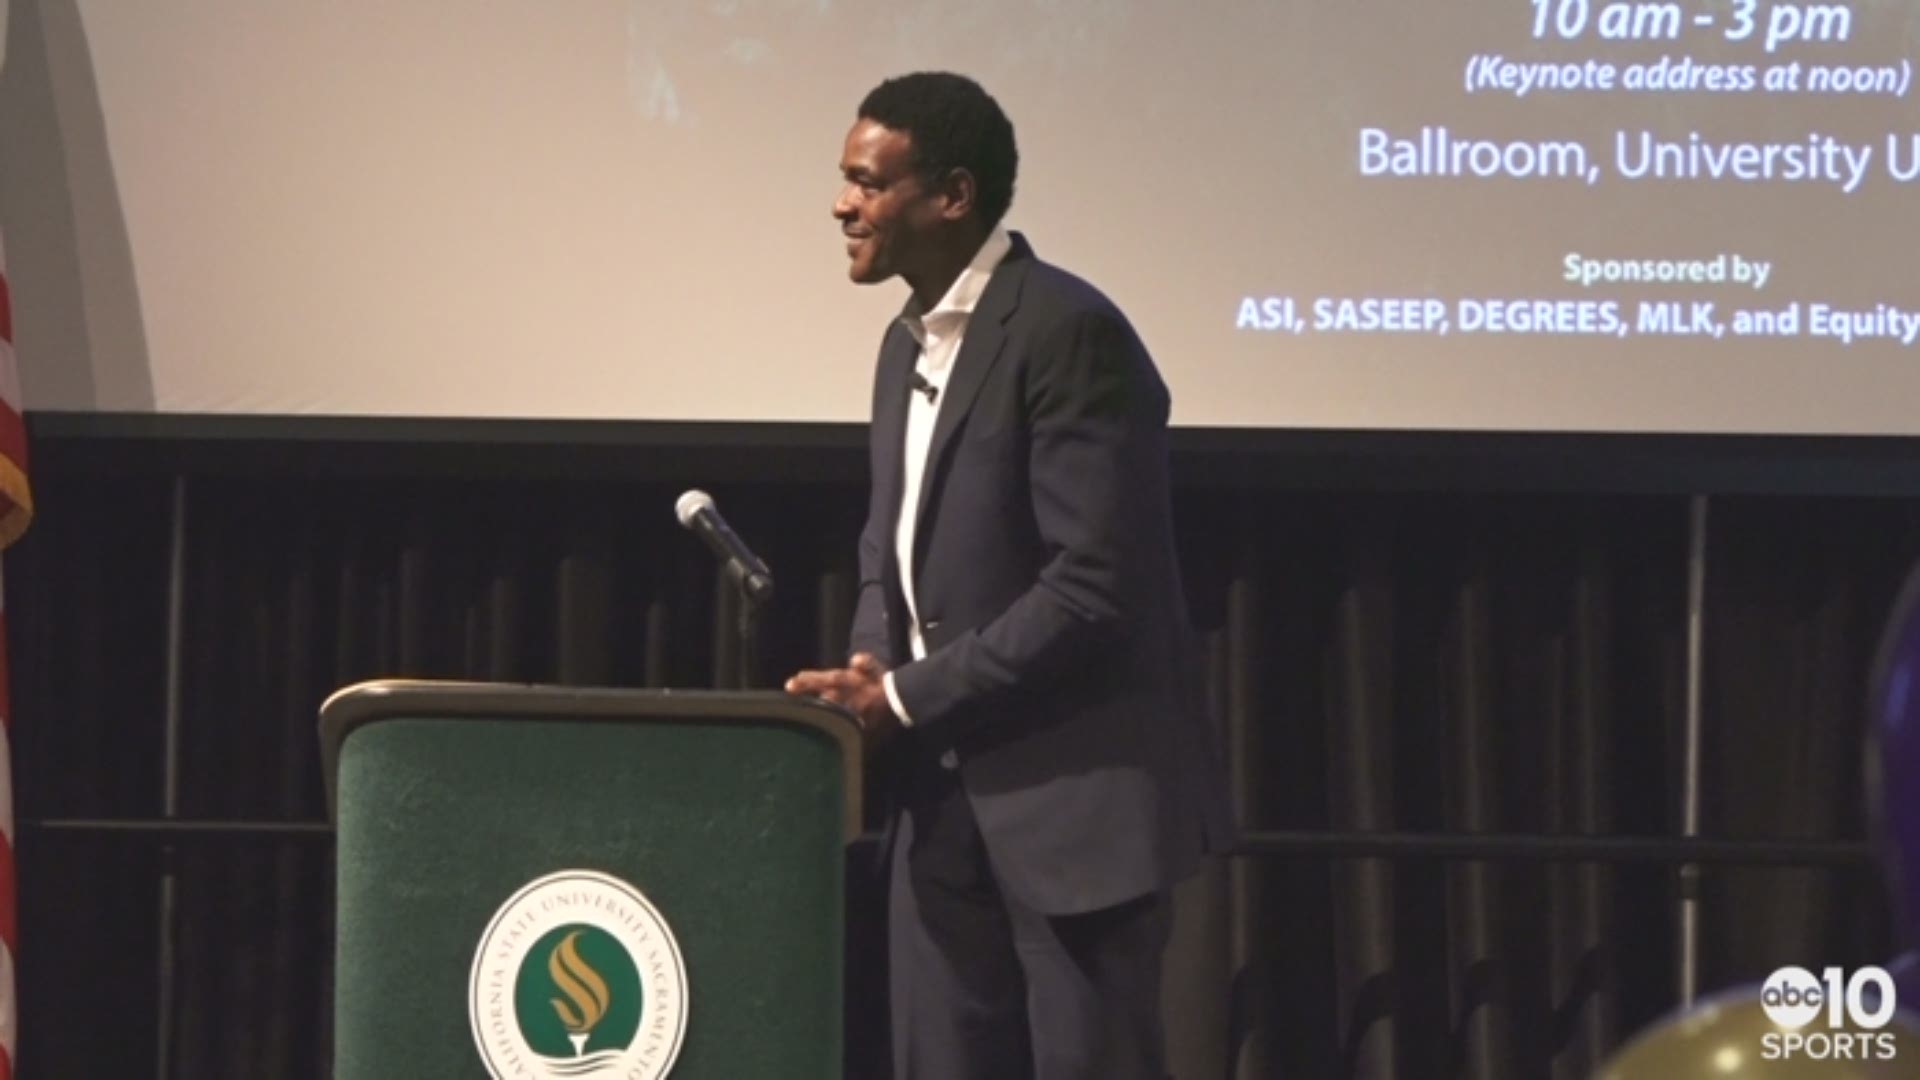 Former Kings All-Star Chris Webber was back in Sacramento to serve on Monday as the keynote speaker at Sac State's Student Academic Success Day.